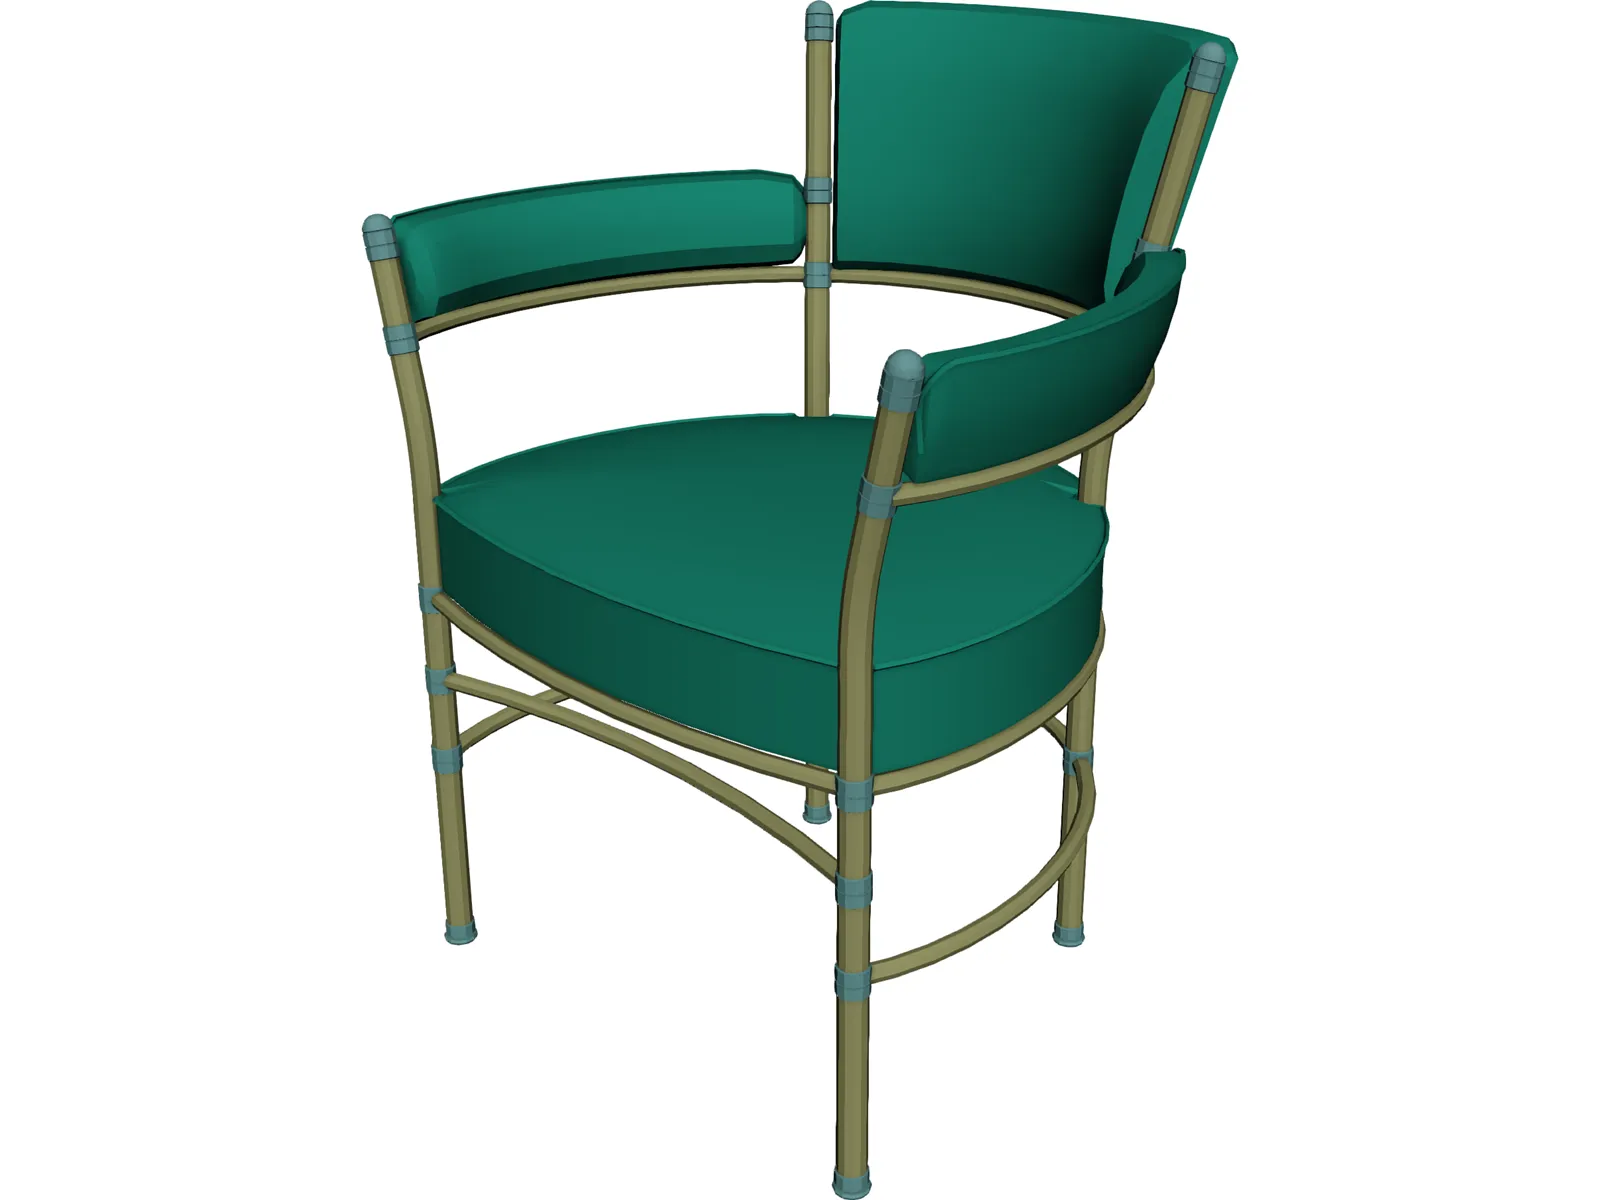 Chair Metal and Belt 3D Model